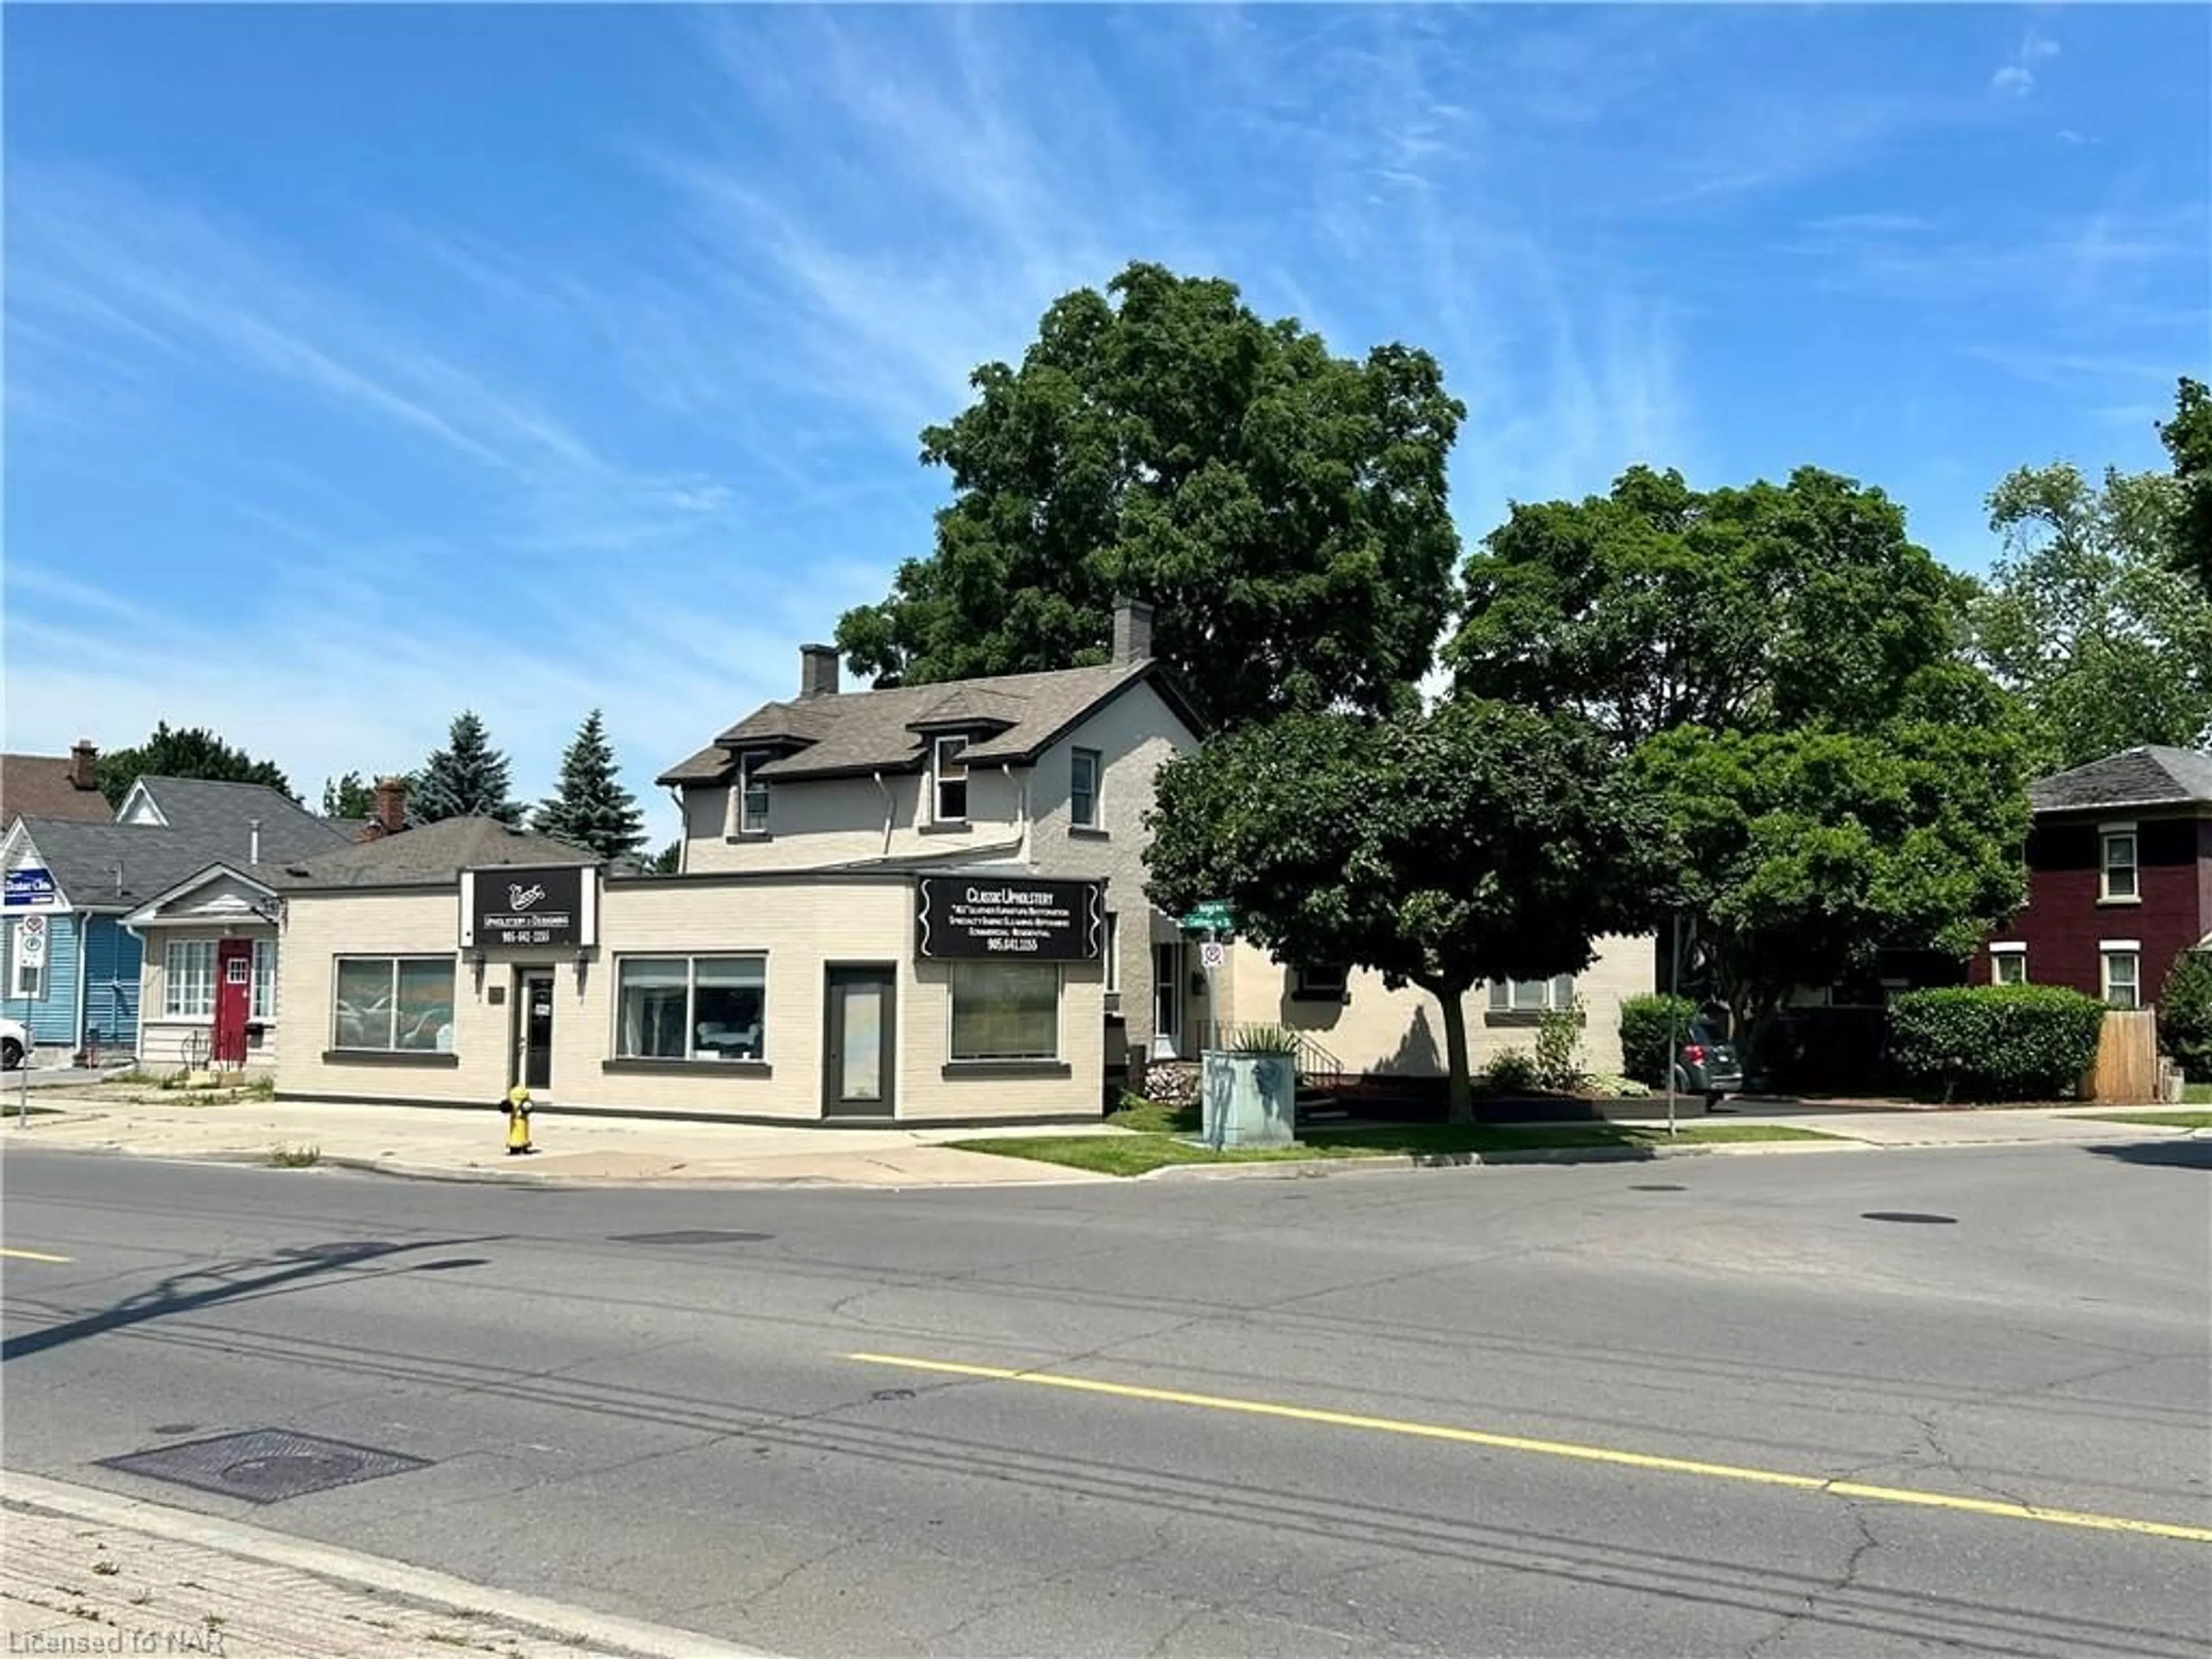 Outside view for 121 Welland Ave, St. Catharines Ontario L2R 2N4